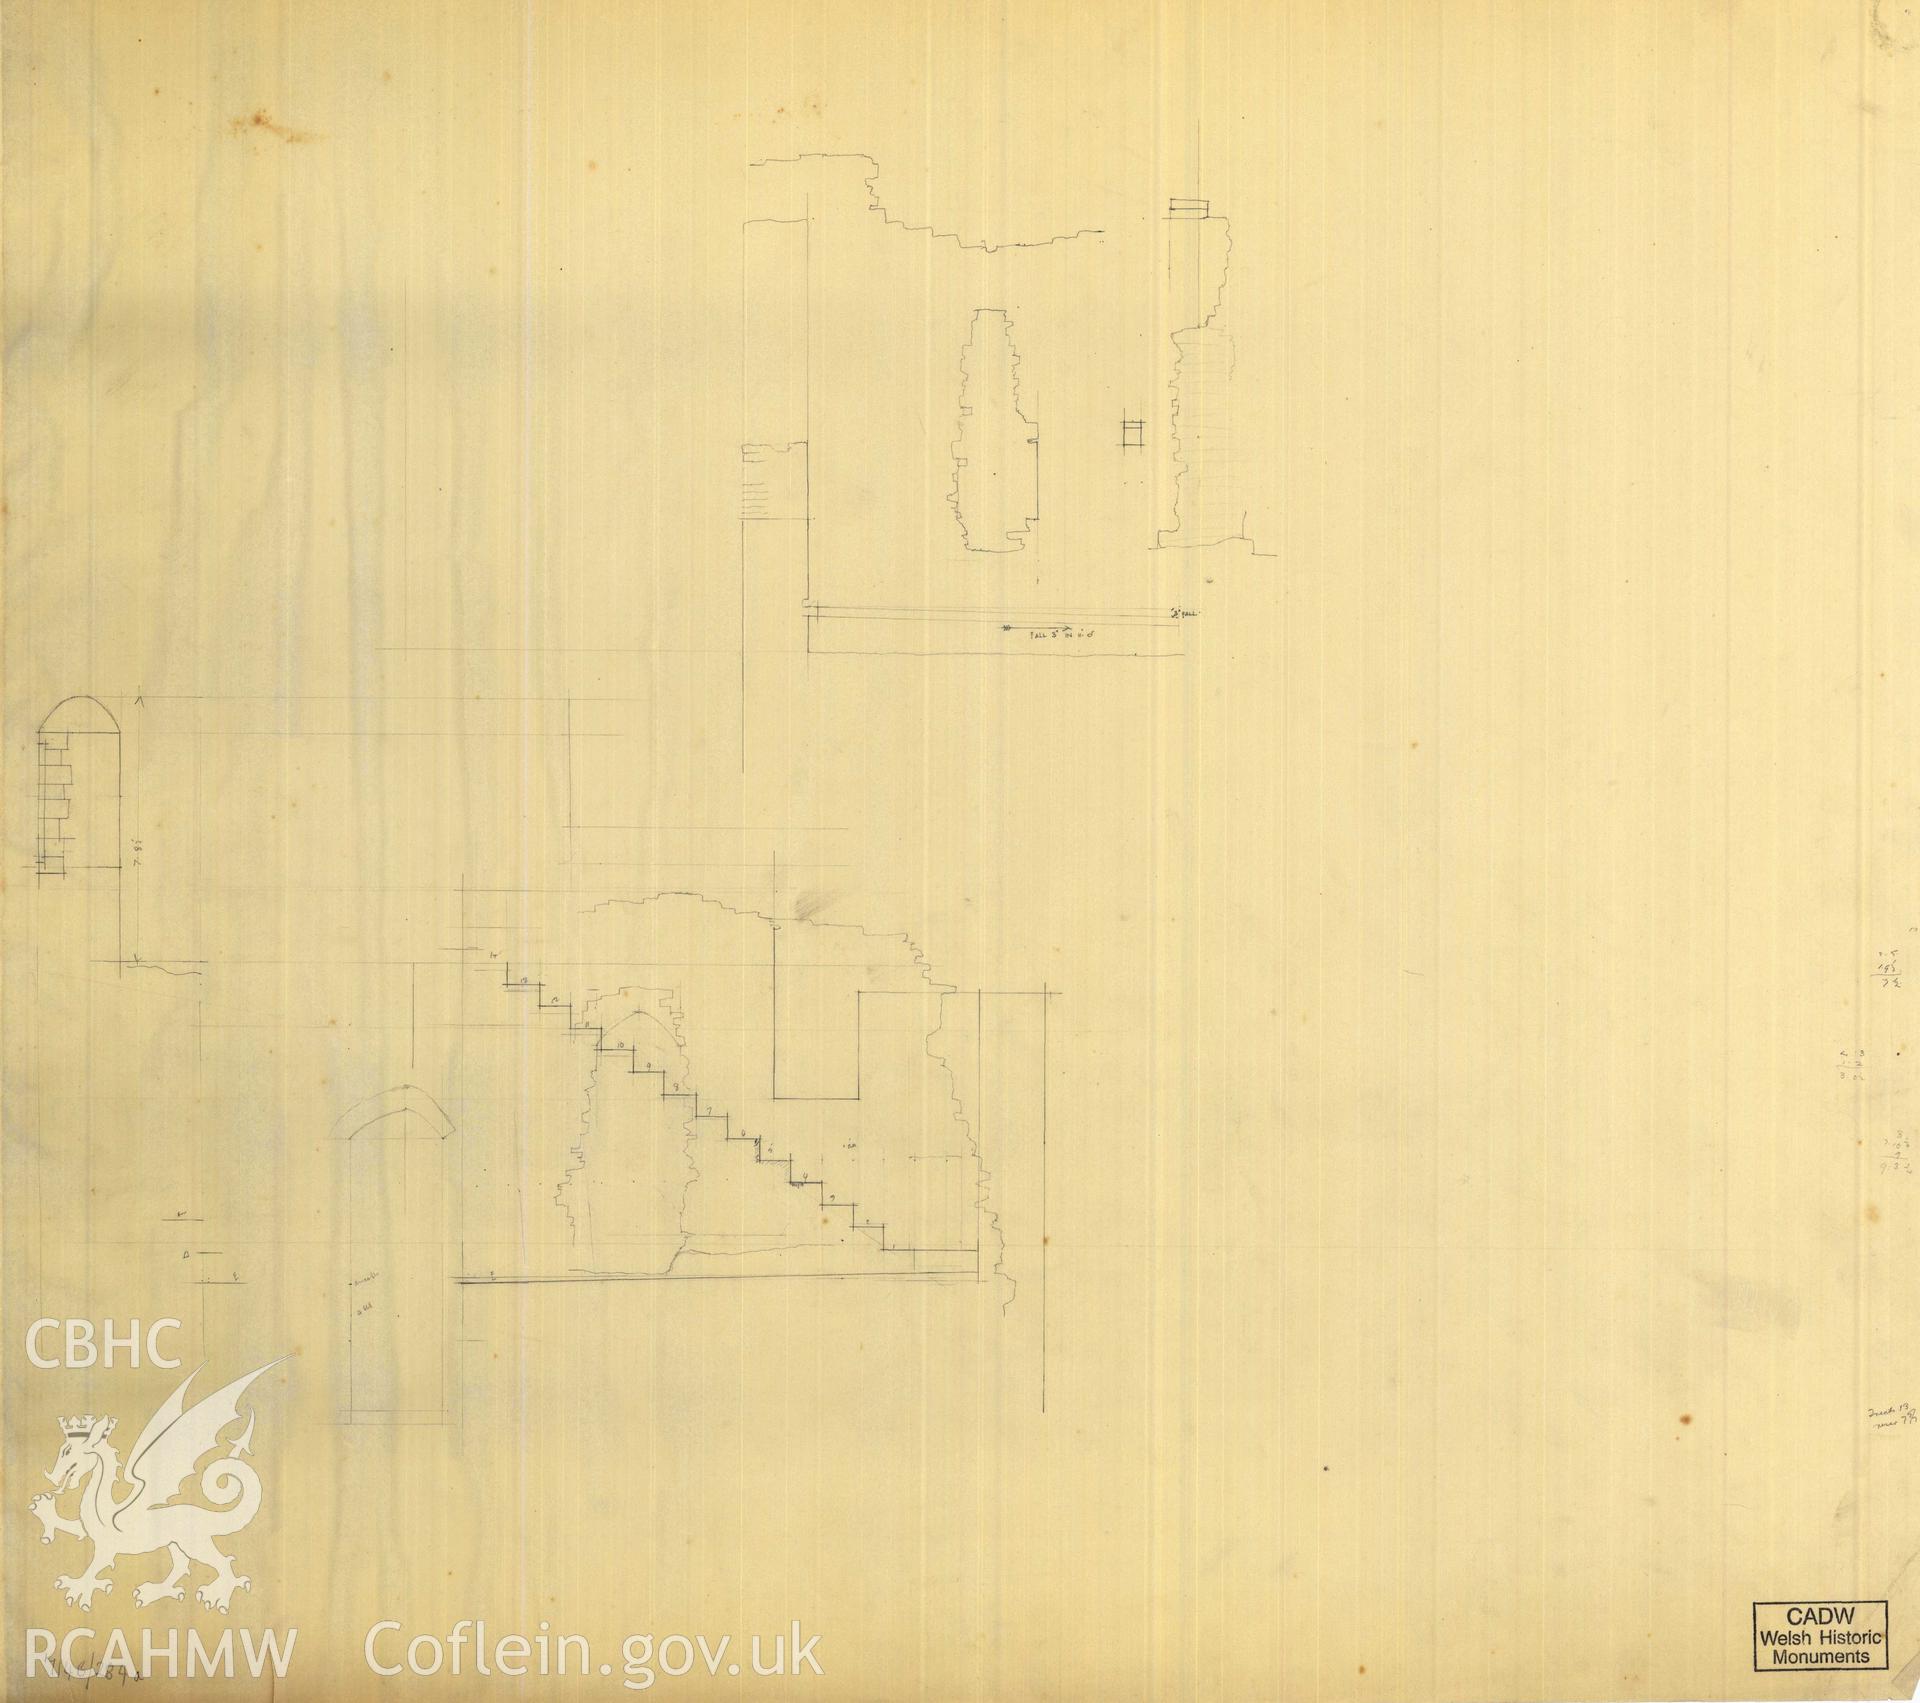 Cadw guardianship monument drawing of Caerphilly Castle. Inner E gate, S turret stairs. Cadw Ref. No:714B/284a. Scale 1:24.